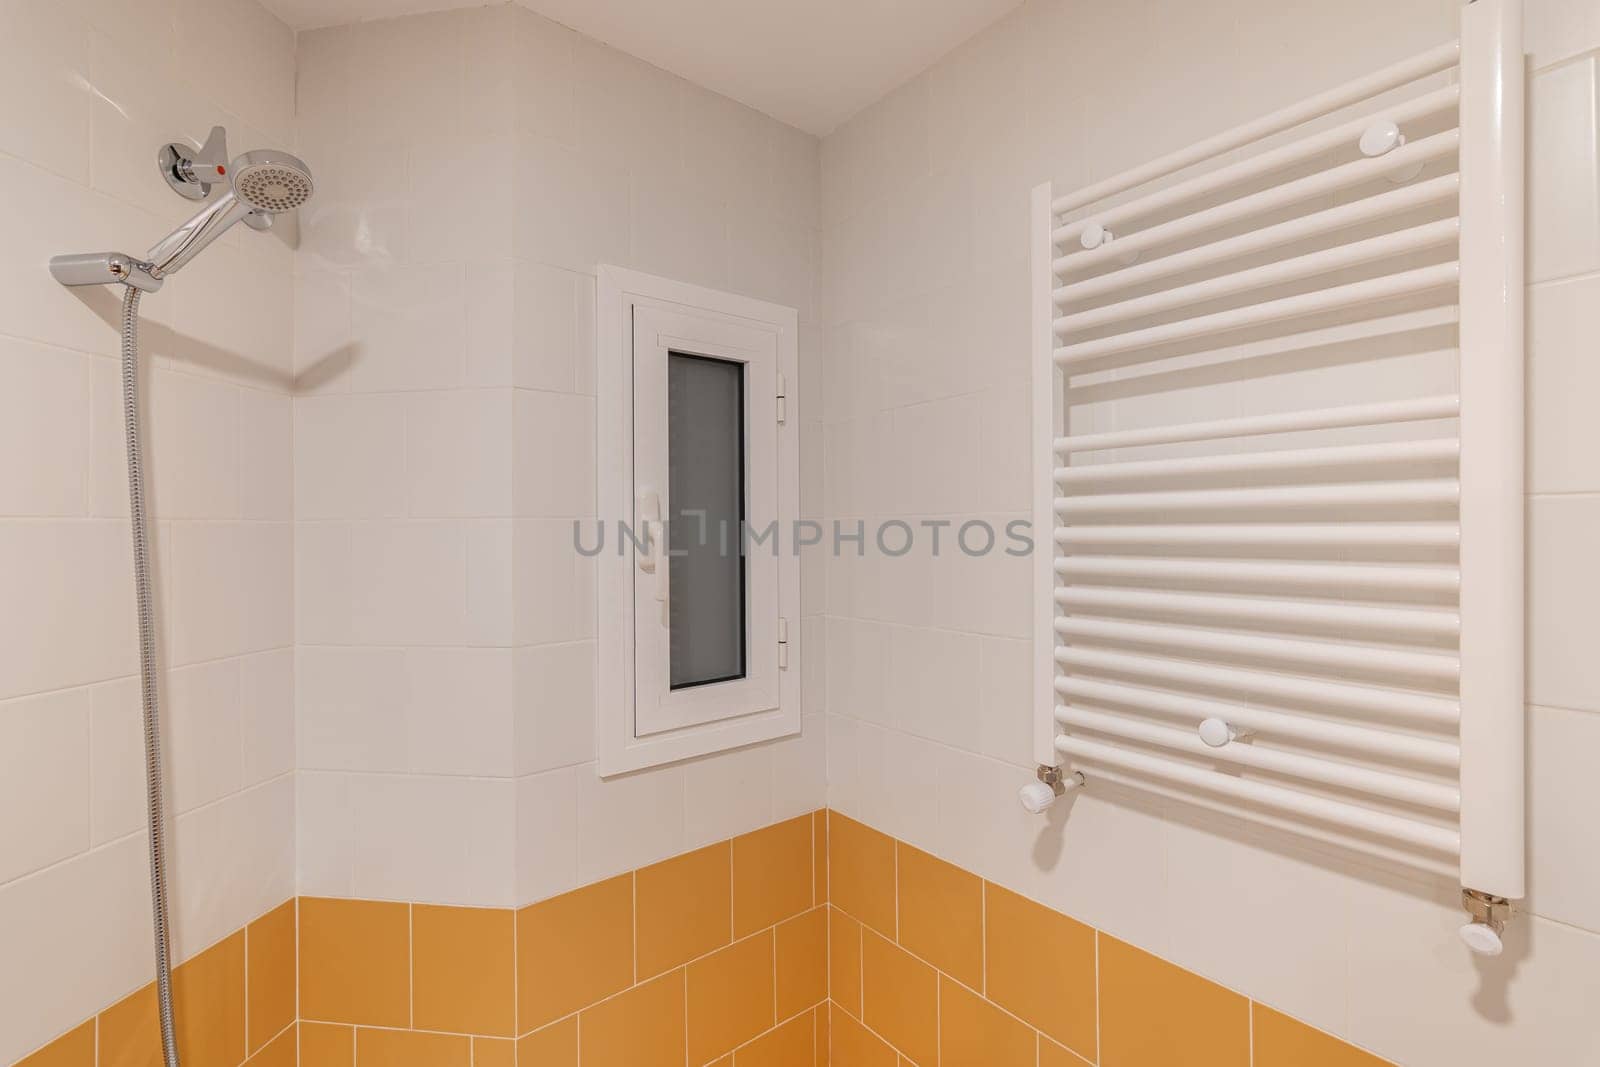 Spacious shower area with a handheld showerhead against yellow and white tiles by apavlin